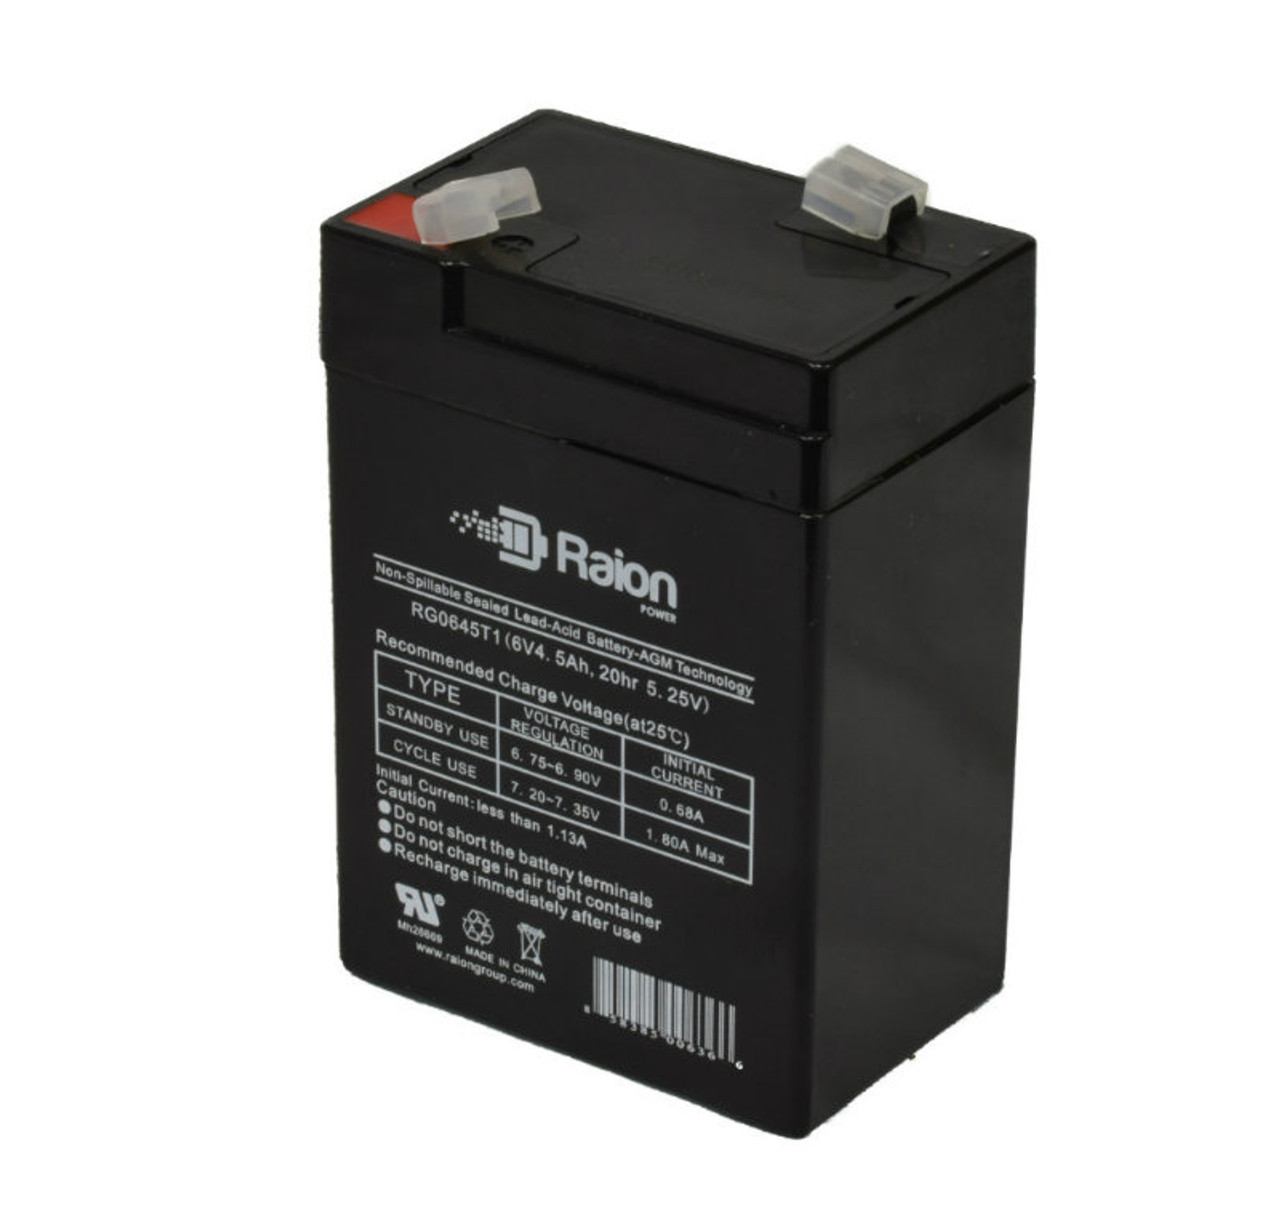 Raion Power RG0645T1 6V 4.5Ah Replacement Battery Cartridge for Blossom BT6-6